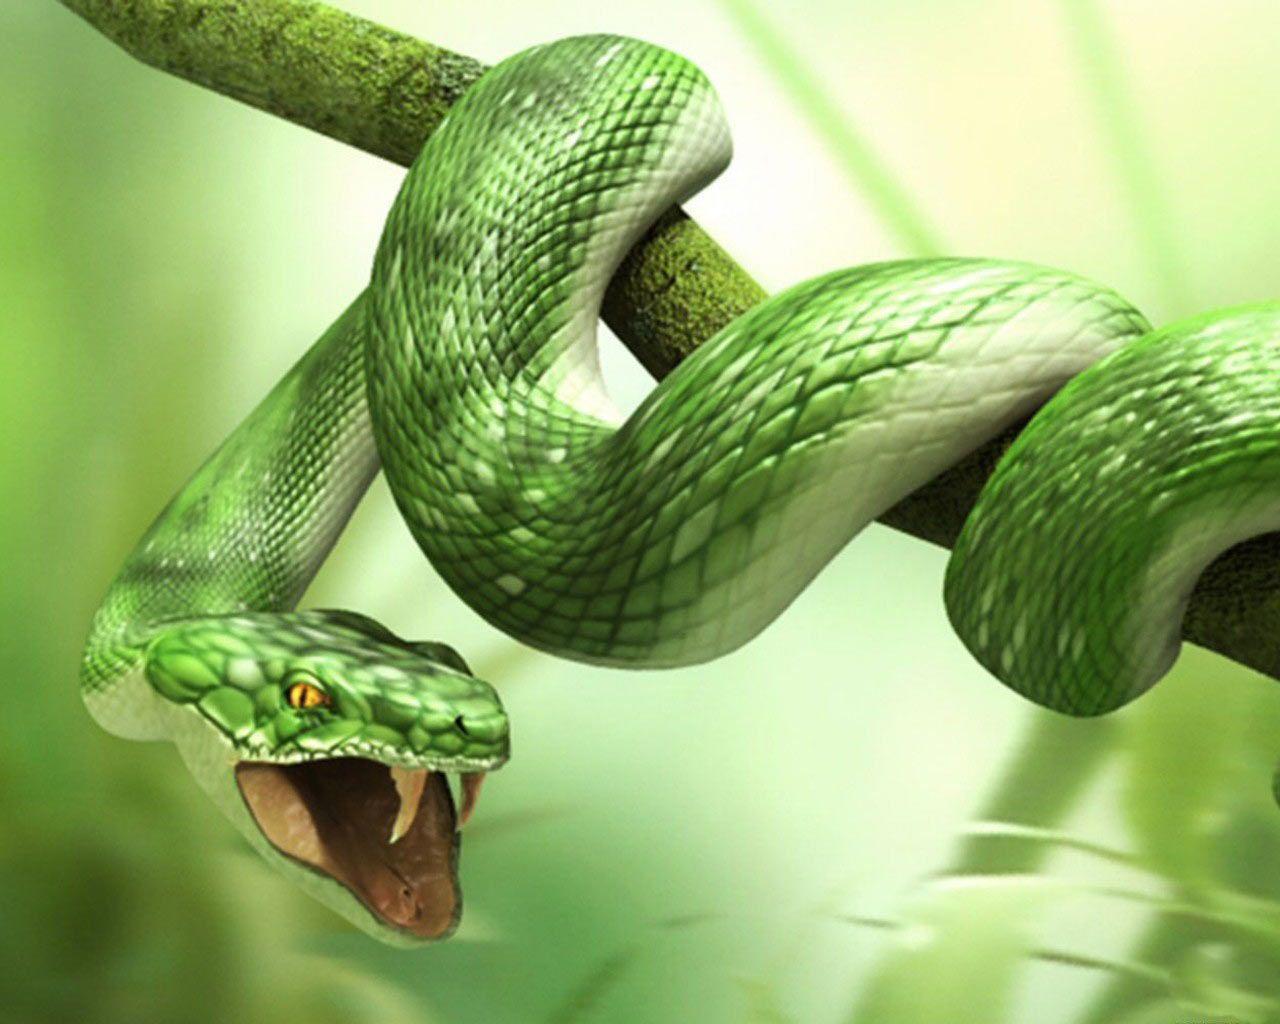 Snake HD Wallpaper and Background Image